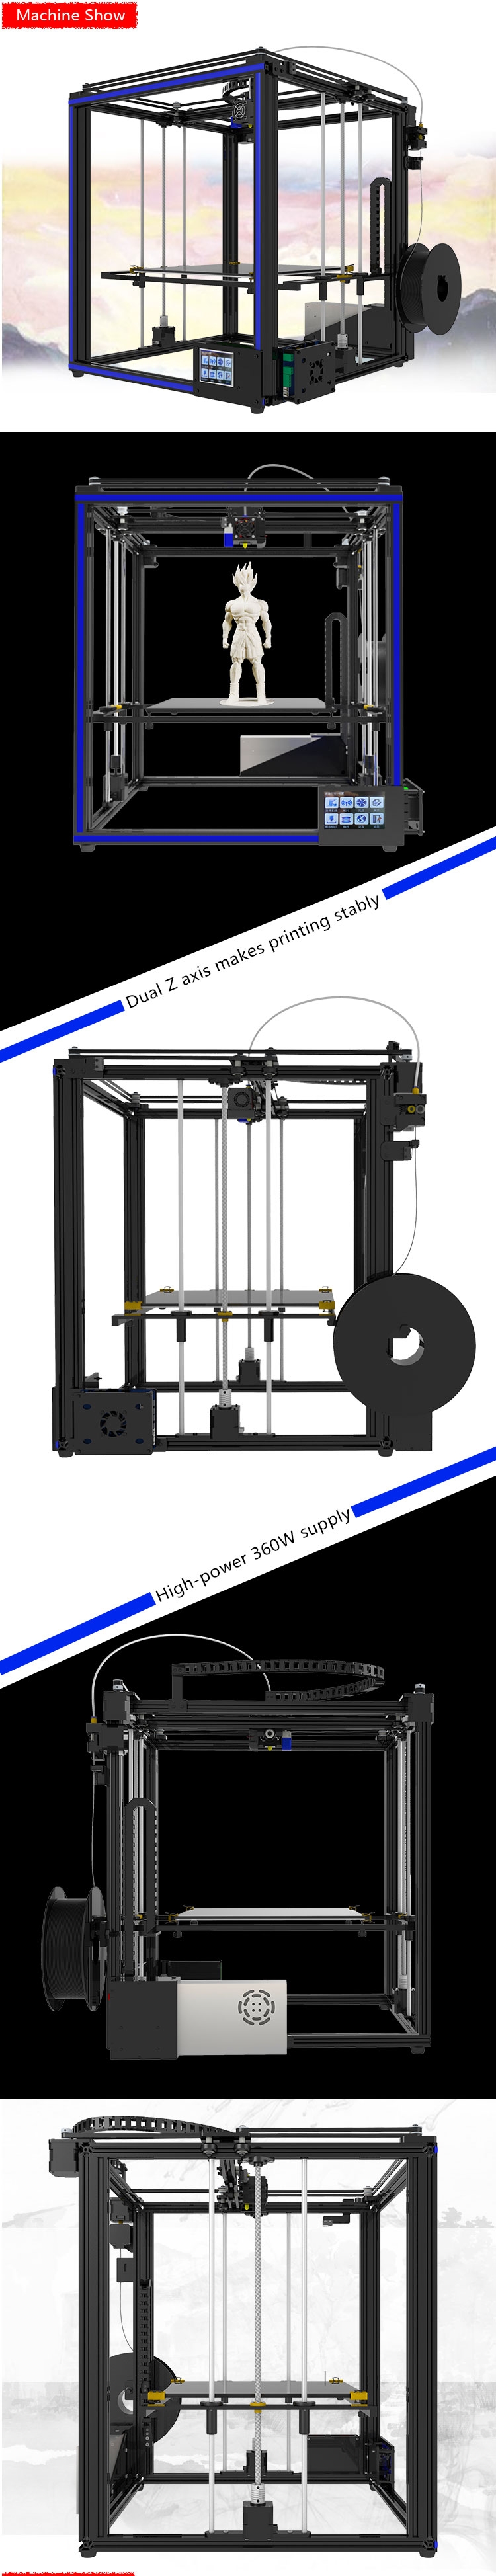 TRONXY® X5SA DIY Aluminium 3D Printer 330*330*400mm Printing Size With Updated Touch Screen/Auto Leveling/Dual Z-axis/Power Resume 45